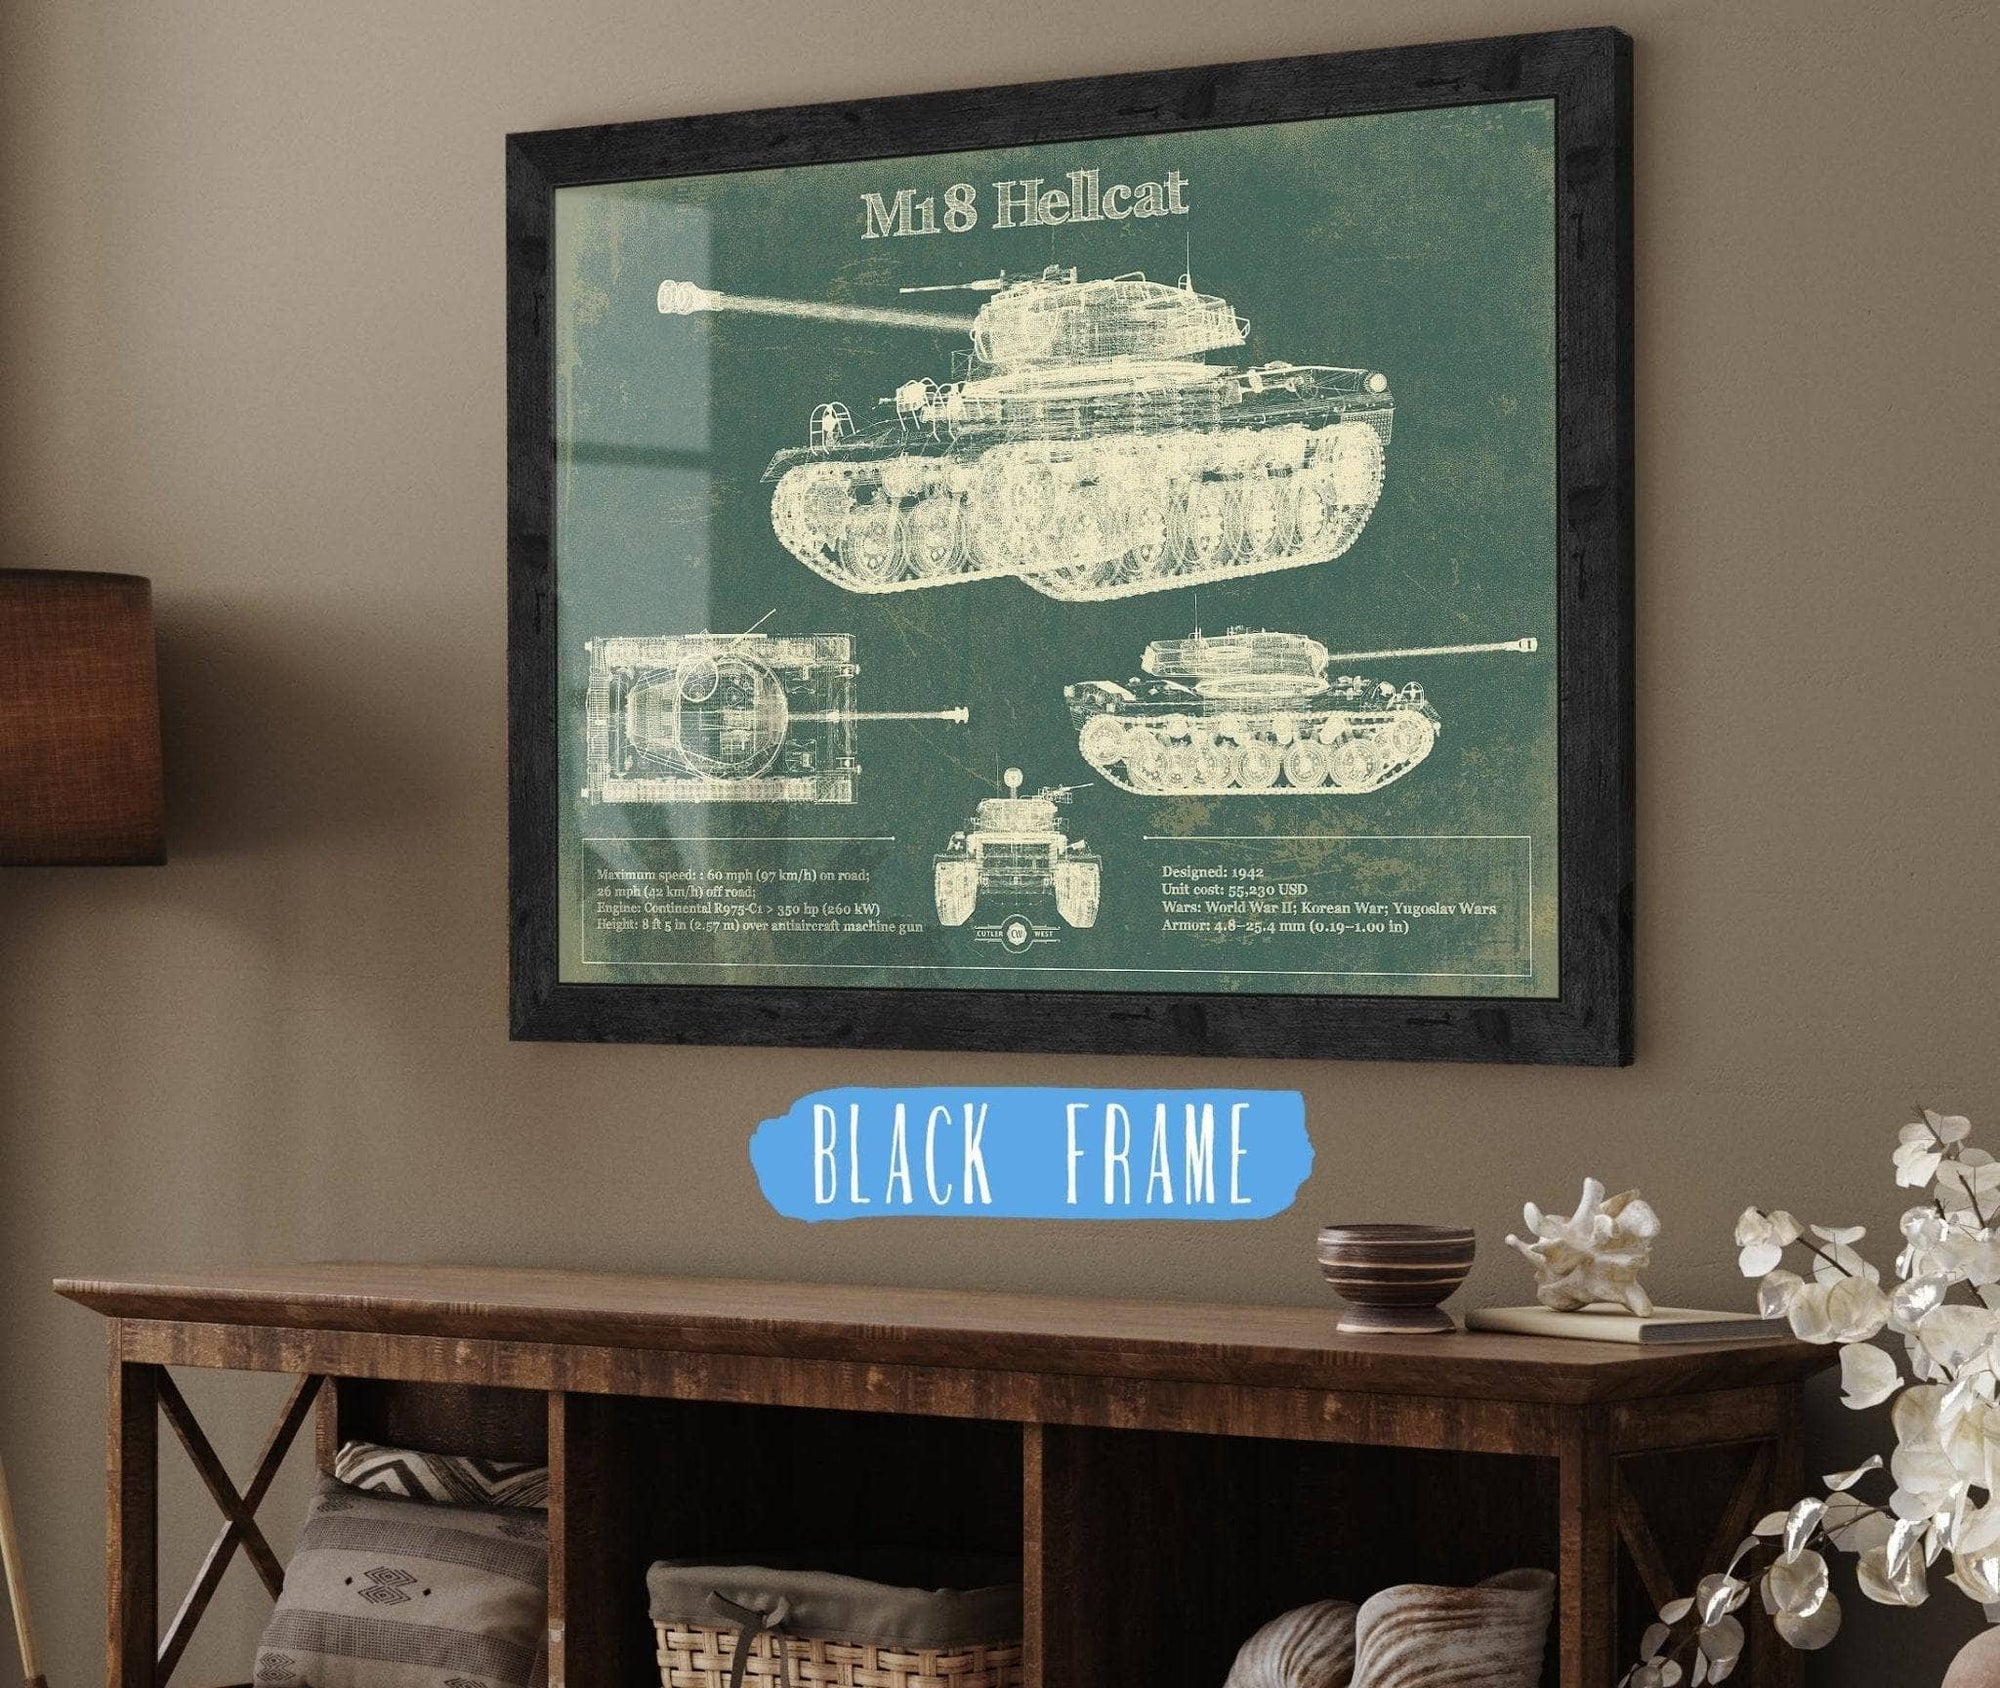 Cutler West Military Weapons Collection 14" x 11" / Black Frame M18 Hellcat Army Color Vintage Blueprint Print 845000225_64709